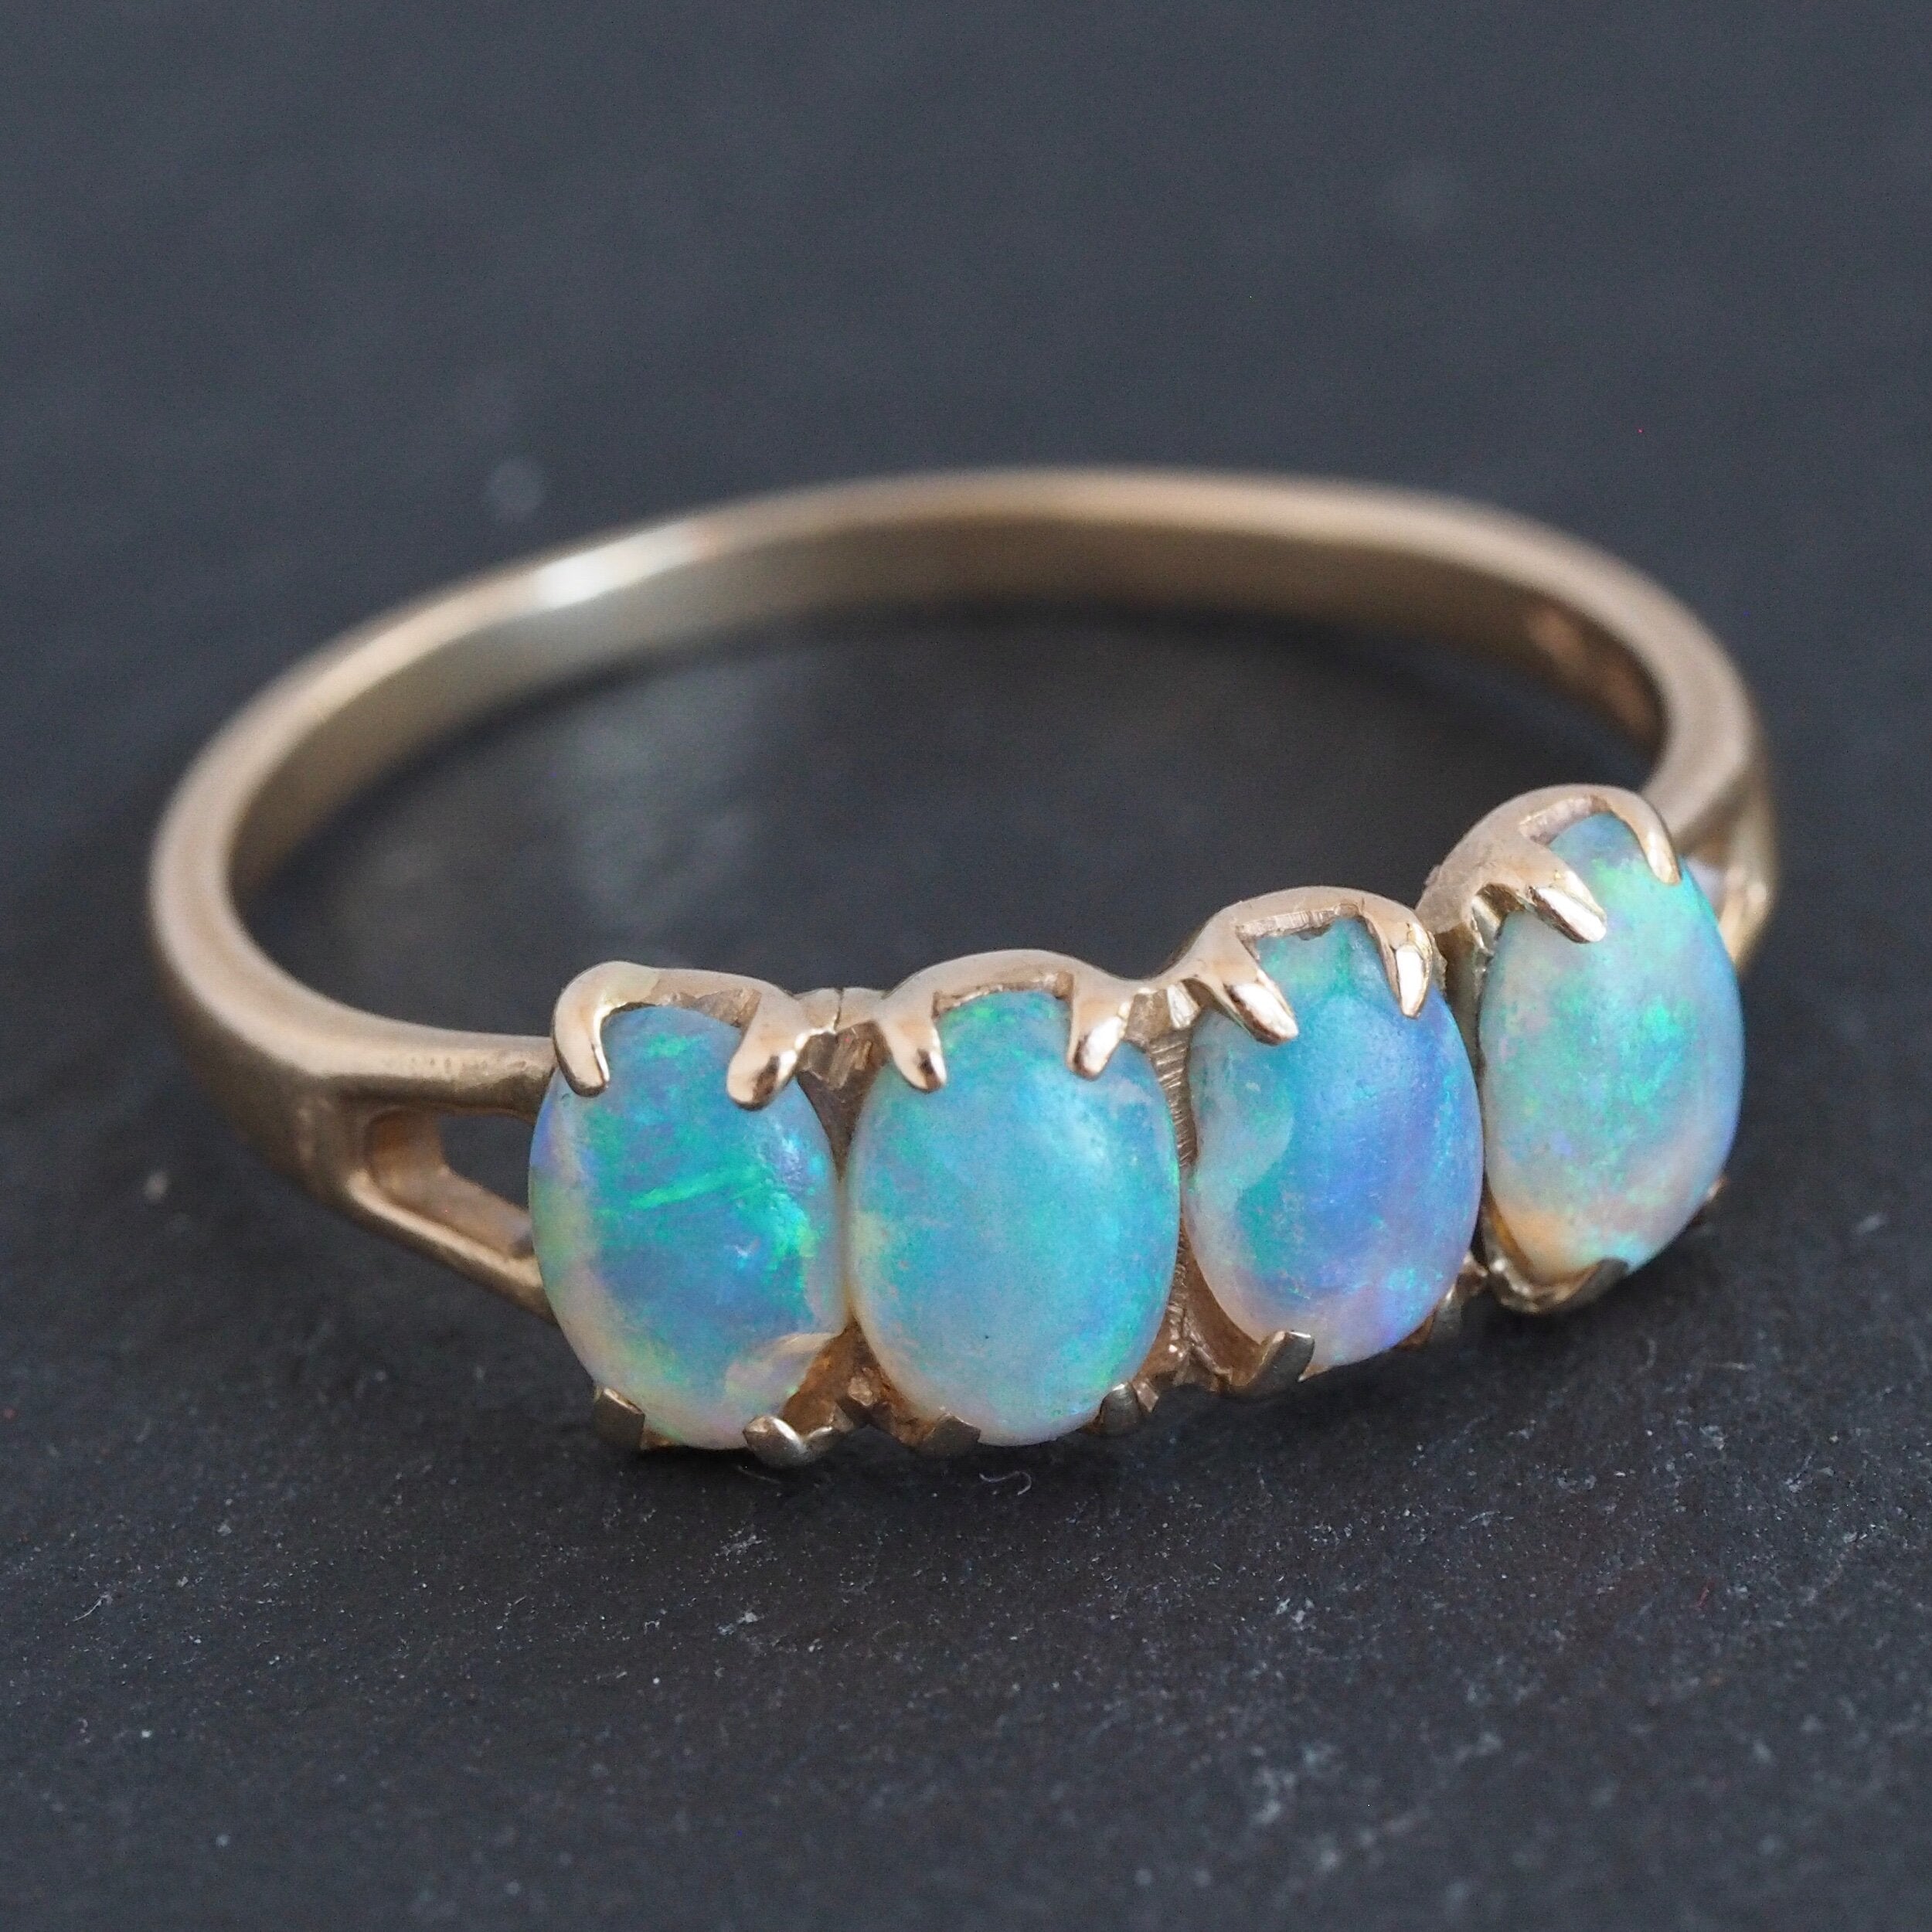 Antique Victorian 14k Gold Four Stone Opal Ring